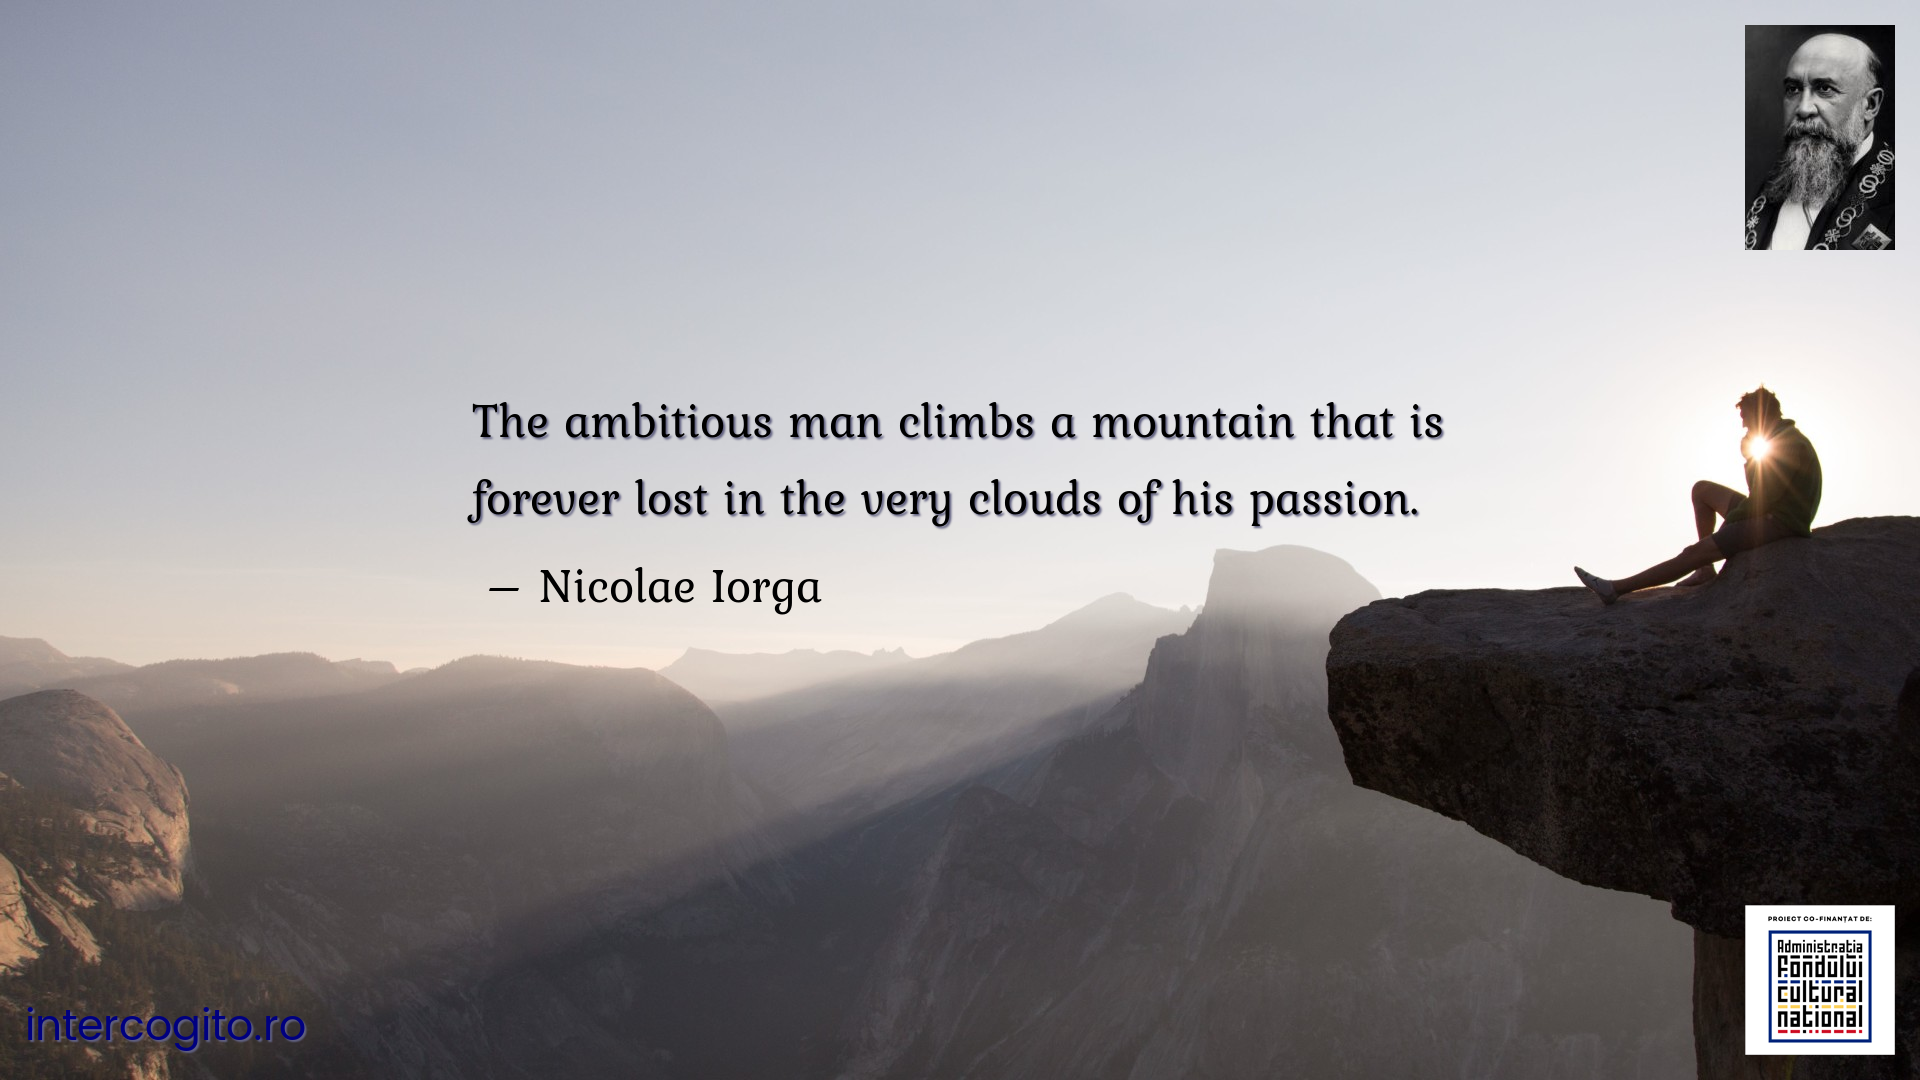 The ambitious man climbs a mountain that is forever lost in the very clouds of his passion.